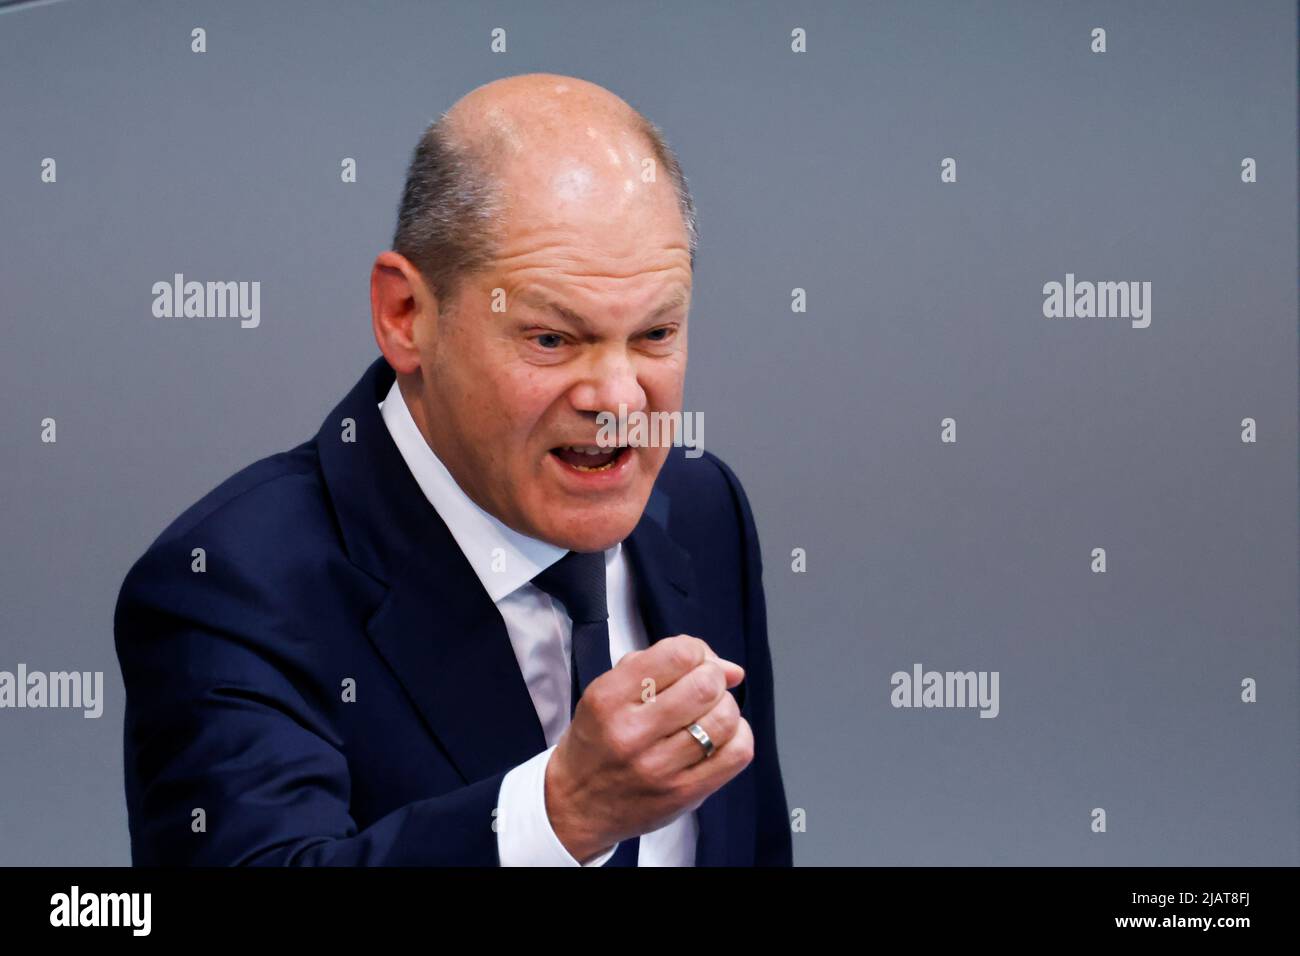 German Chancellor Olaf Scholz speaks during a session of Germany's lower house of parliament, the Bundestag, in Berlin, Germany, June 1, 2022. REUTERS/Hannibal Hanschke Stock Photo